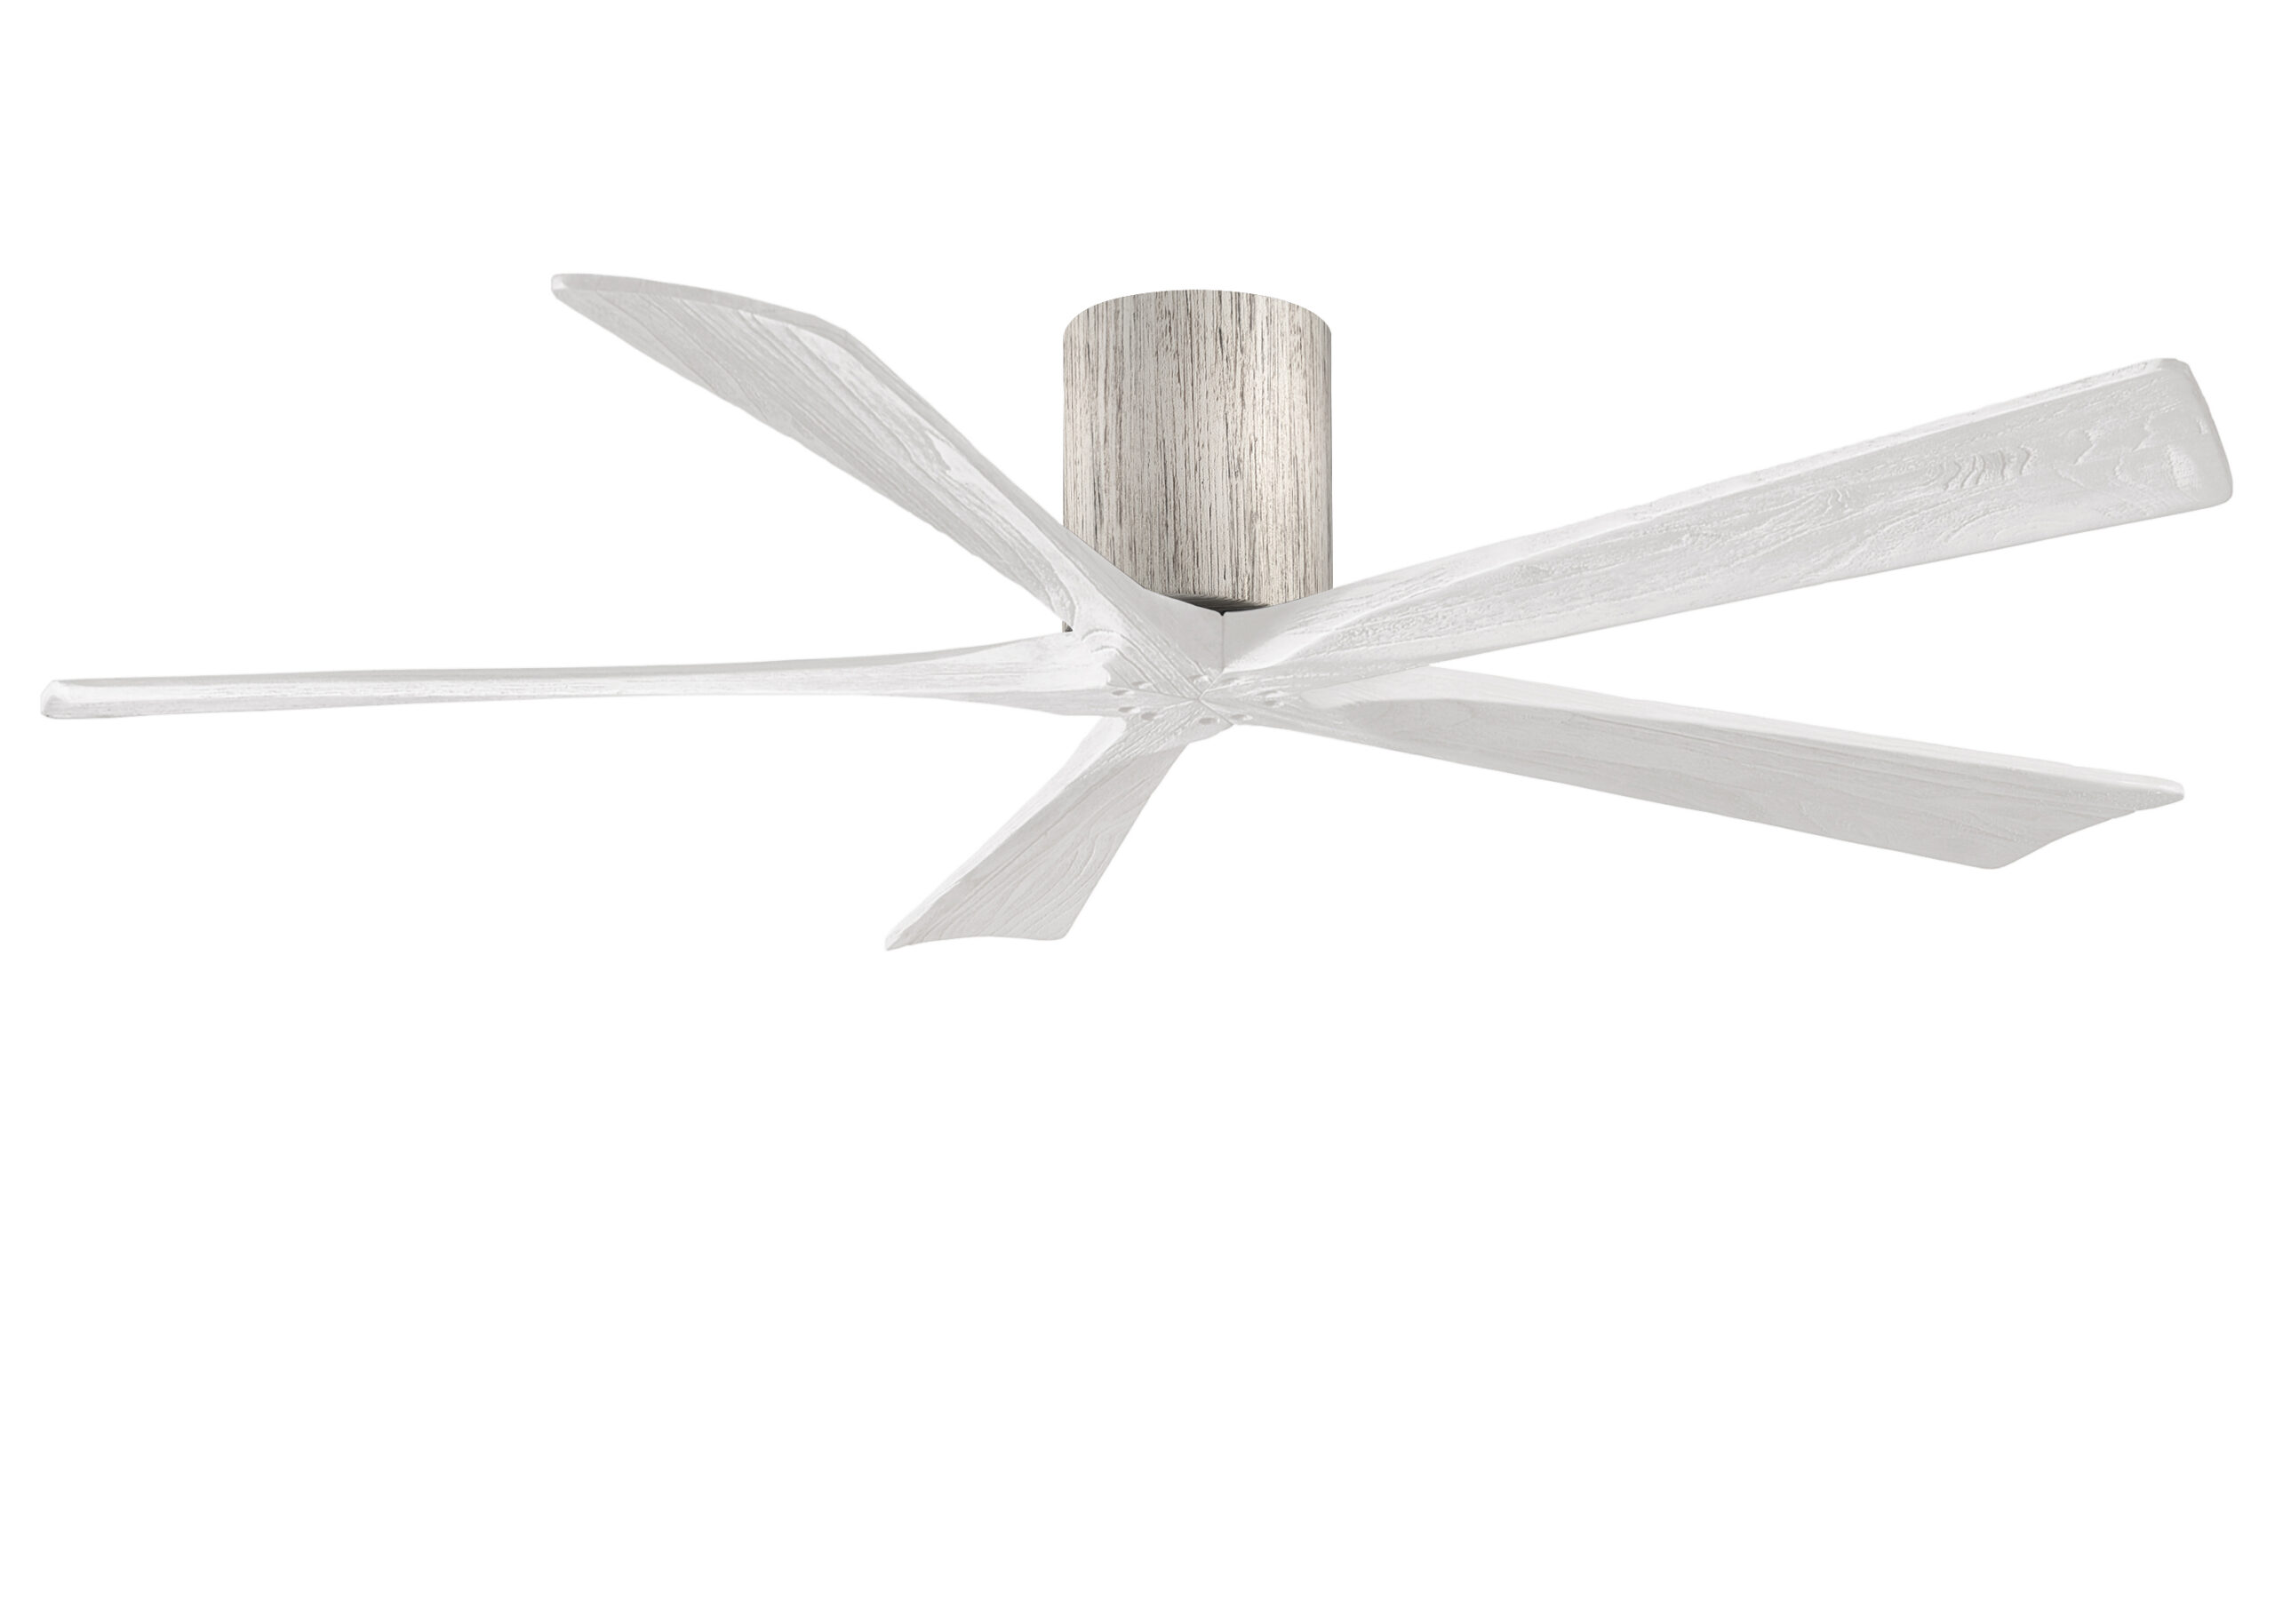 Irene-5H Ceiling Fan in Barn Wood Finish with 60